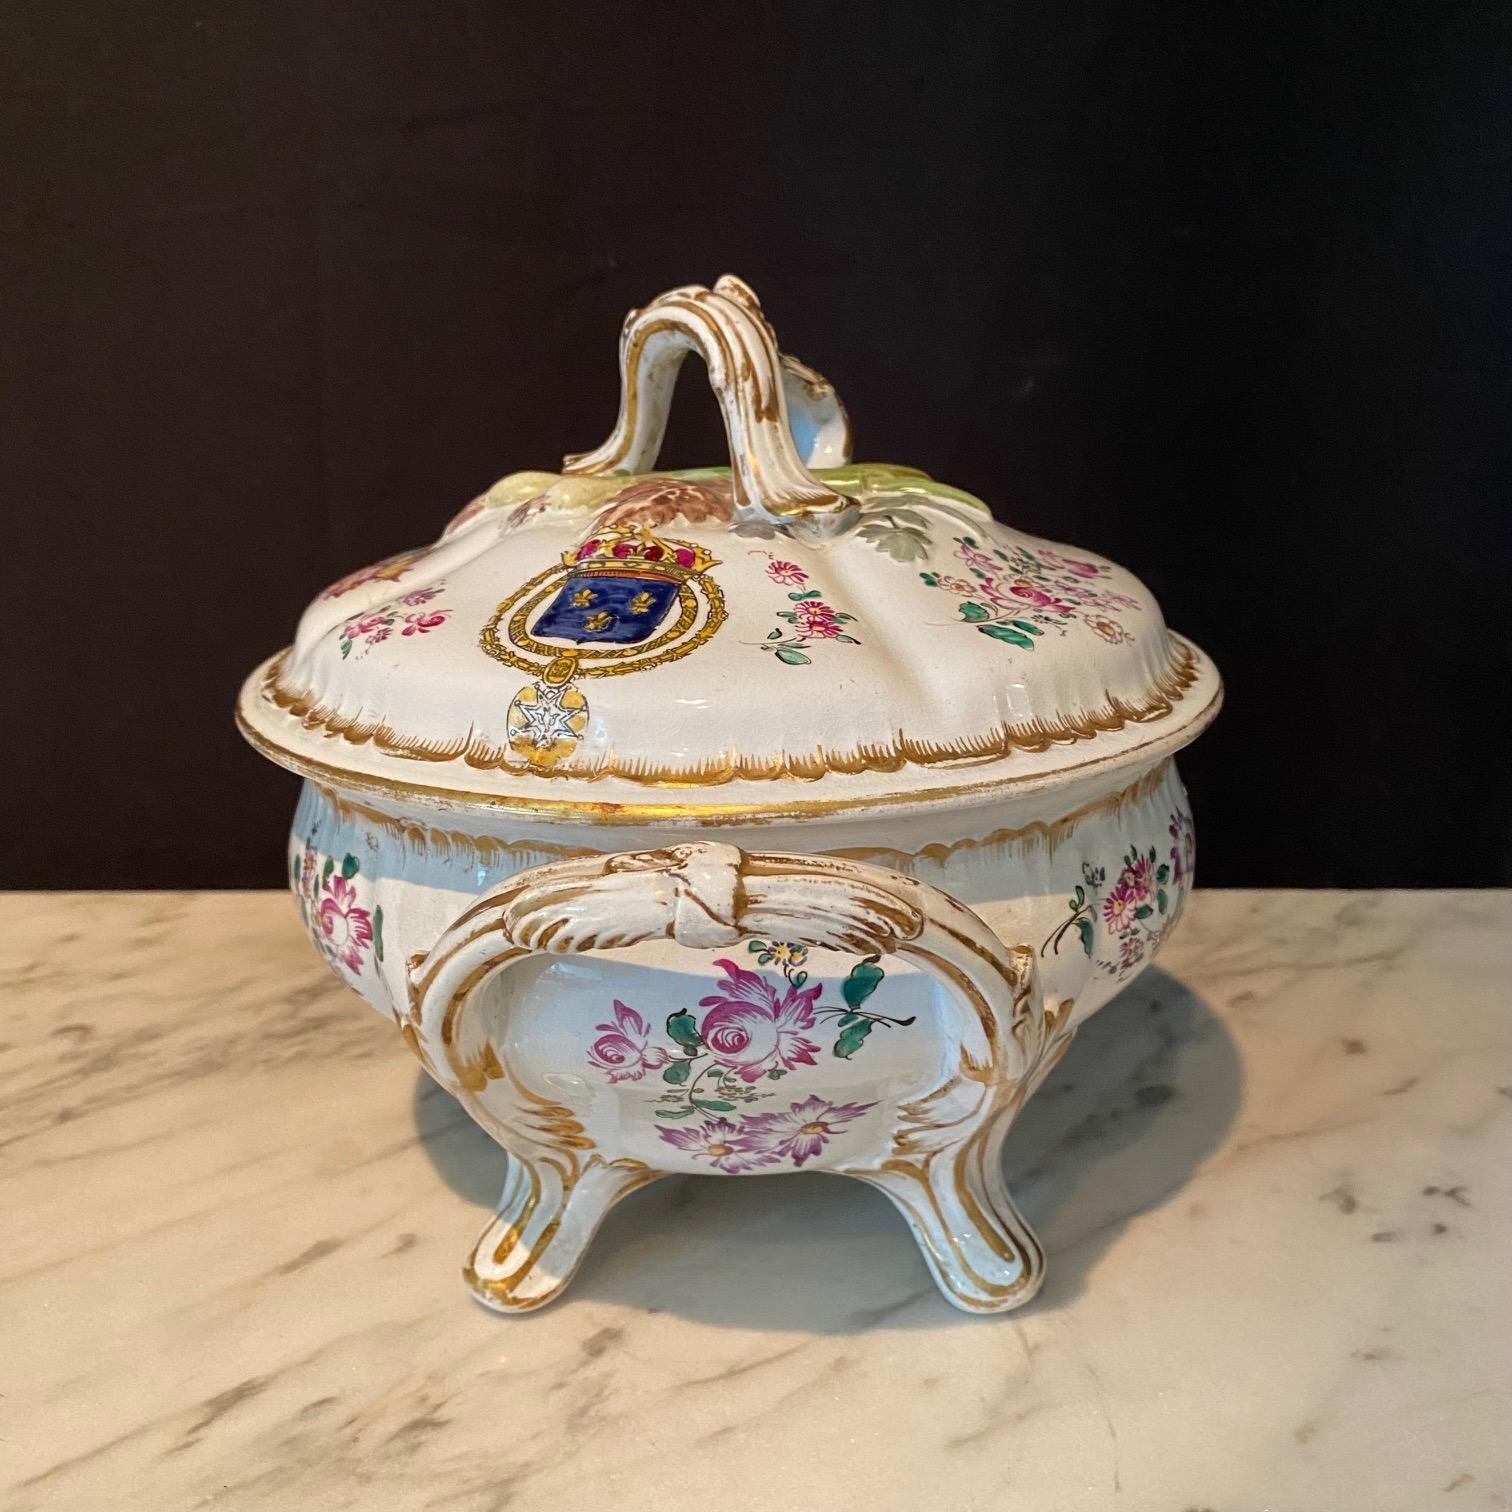 A lovely, highly-detailed pair of French faience soup tureens, with handles, feet and nicely-sculpted vegetable decorated cover (18th century). The top cover has leeks, flowers and herbs, and the painted decoration on the sides includes shields with